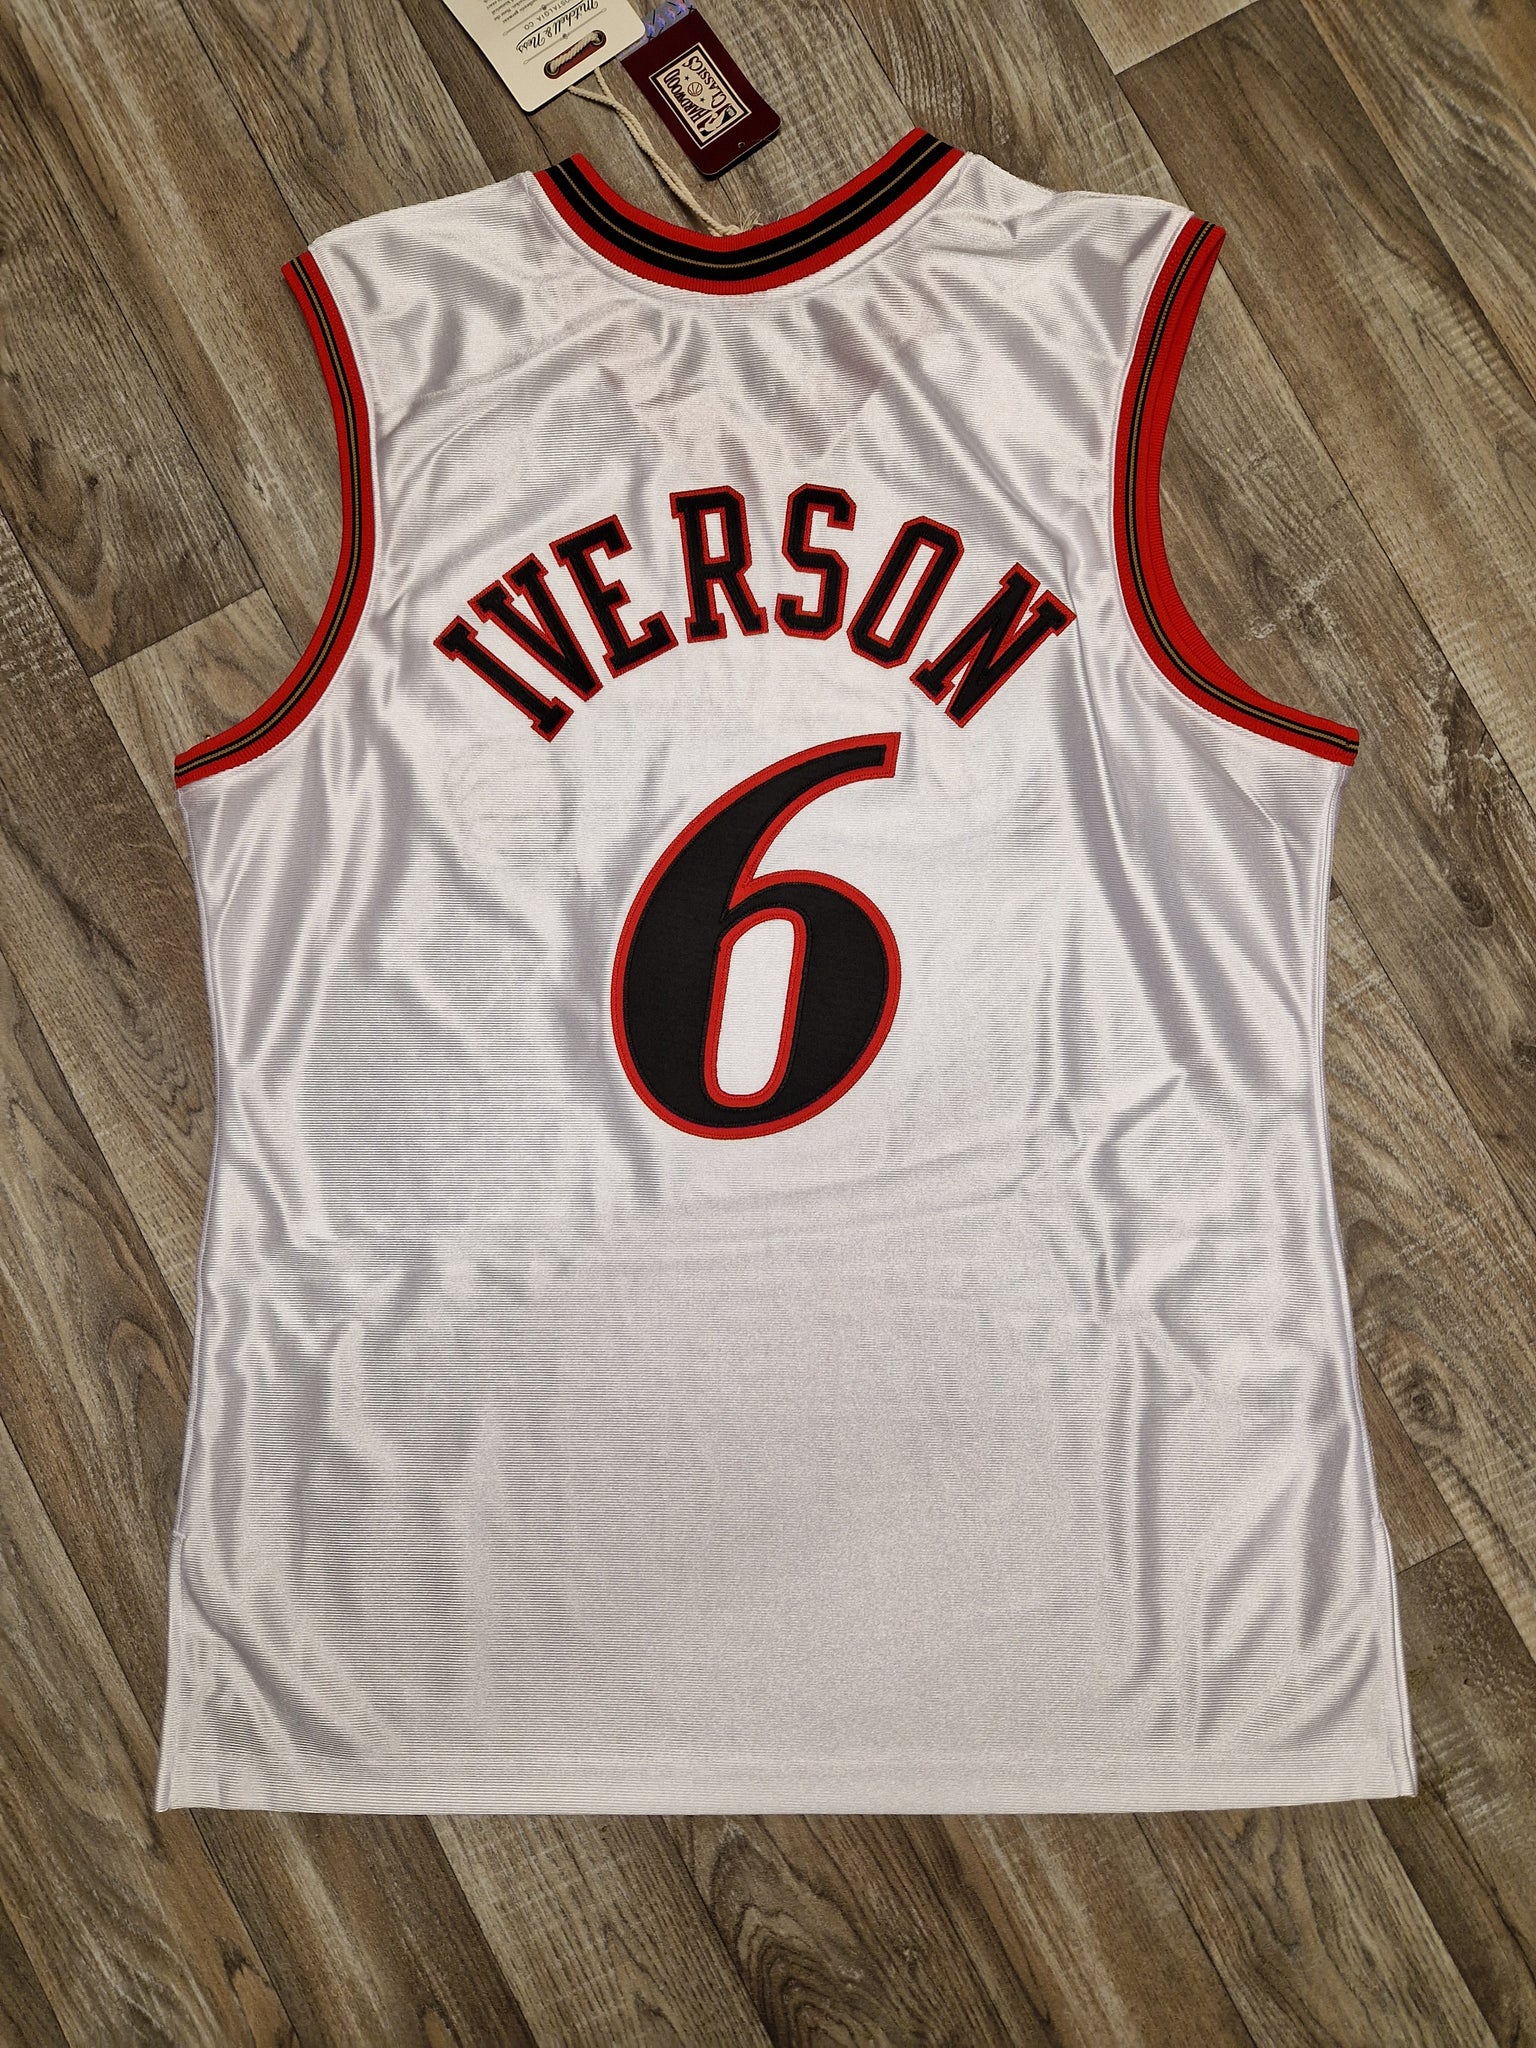 🏀 Allen Iverson Authentic NBA All Star 2002 Jersey – The